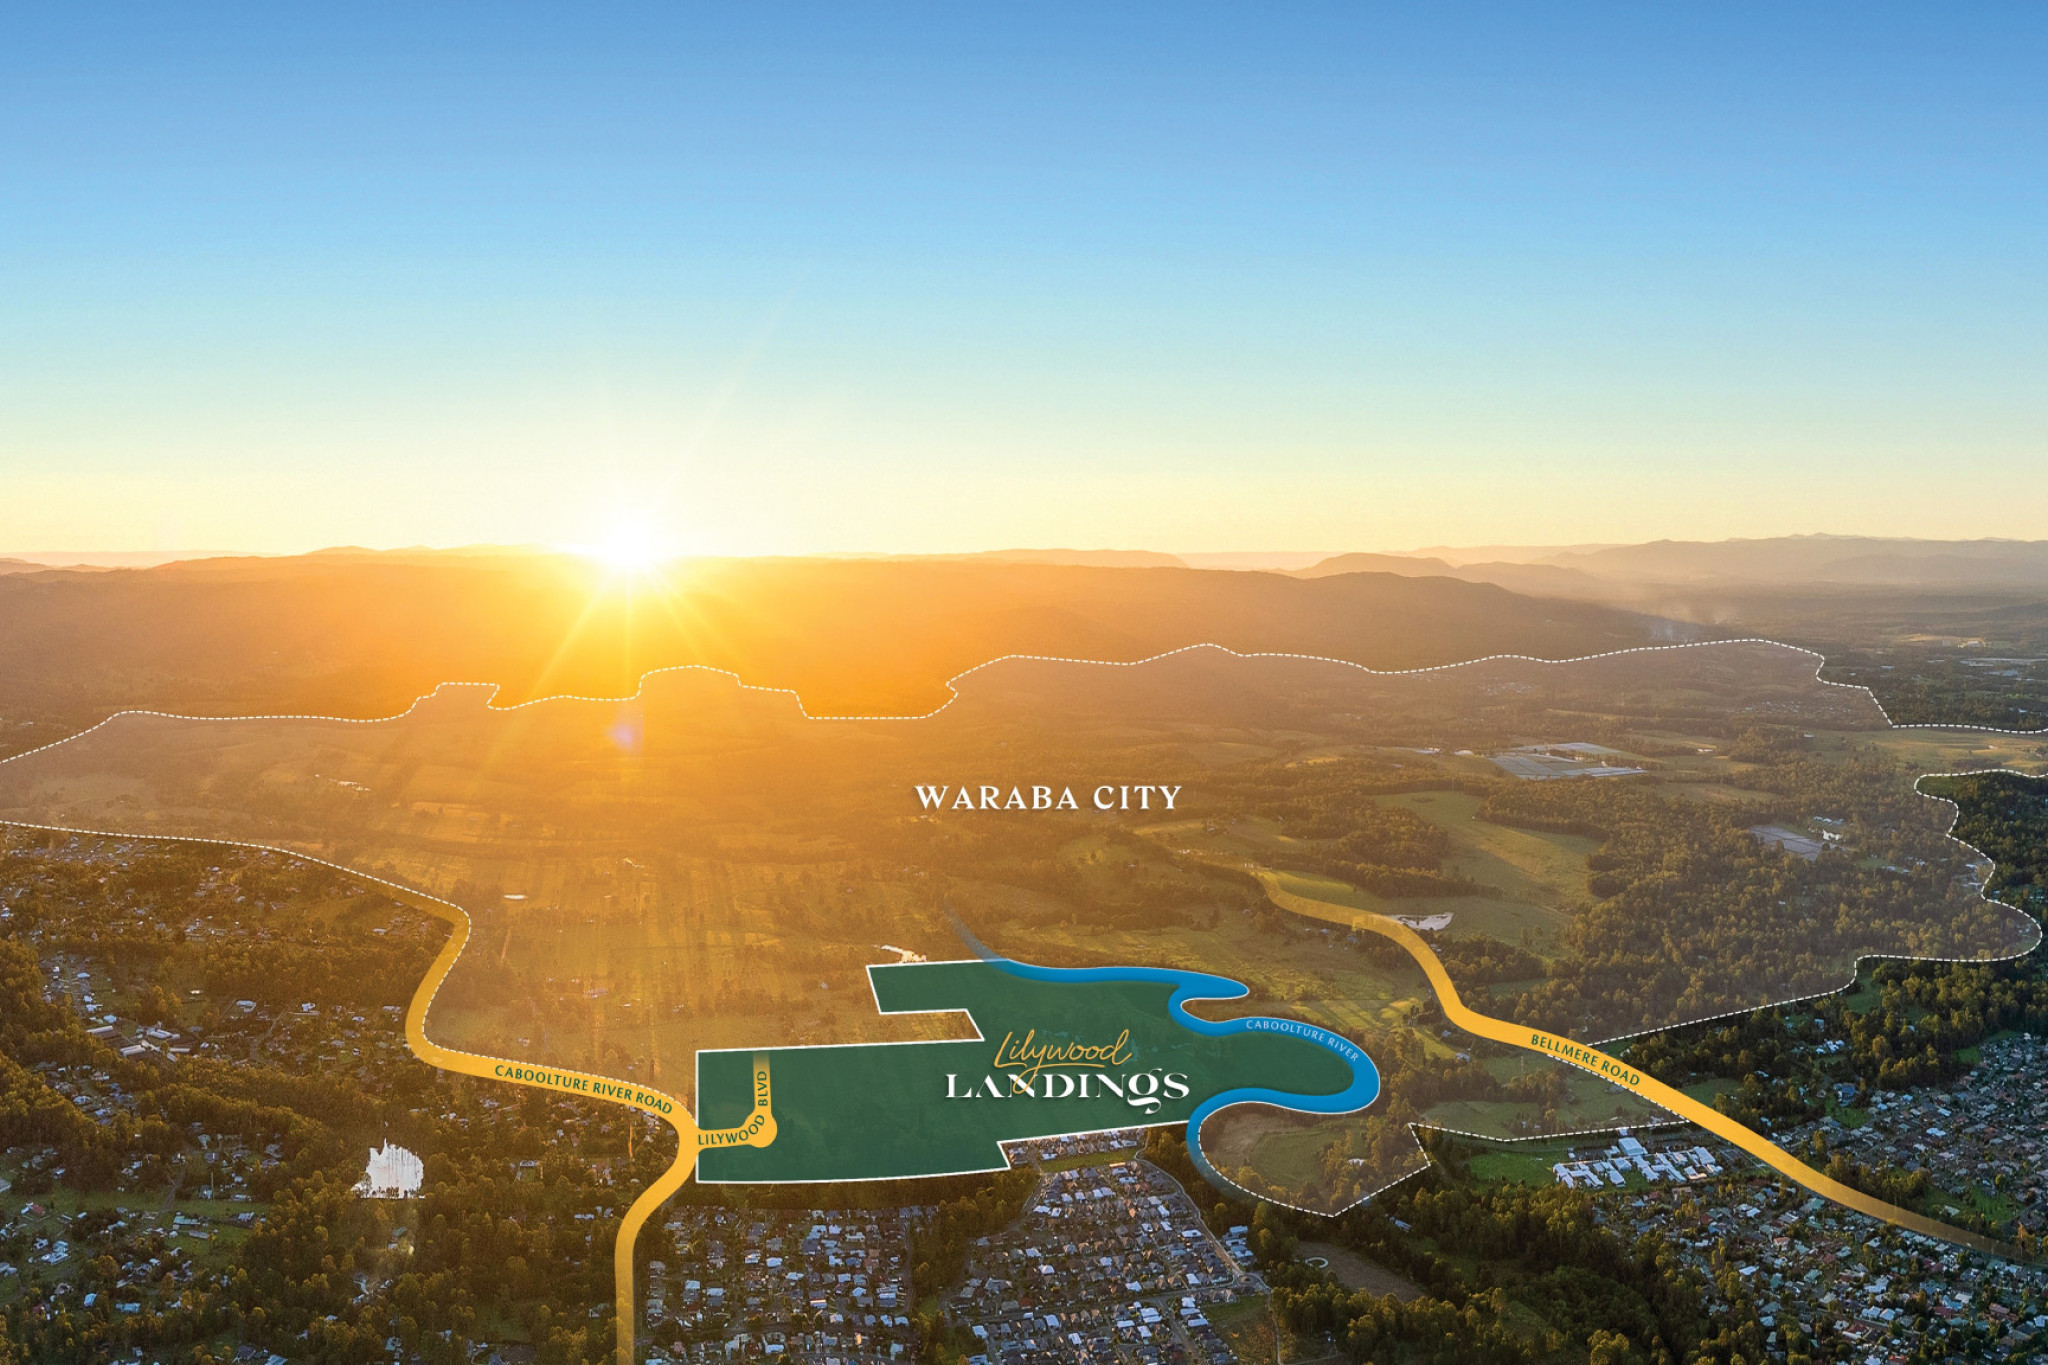 Layout of the new city of Waraba and the Lilywood Landings community.